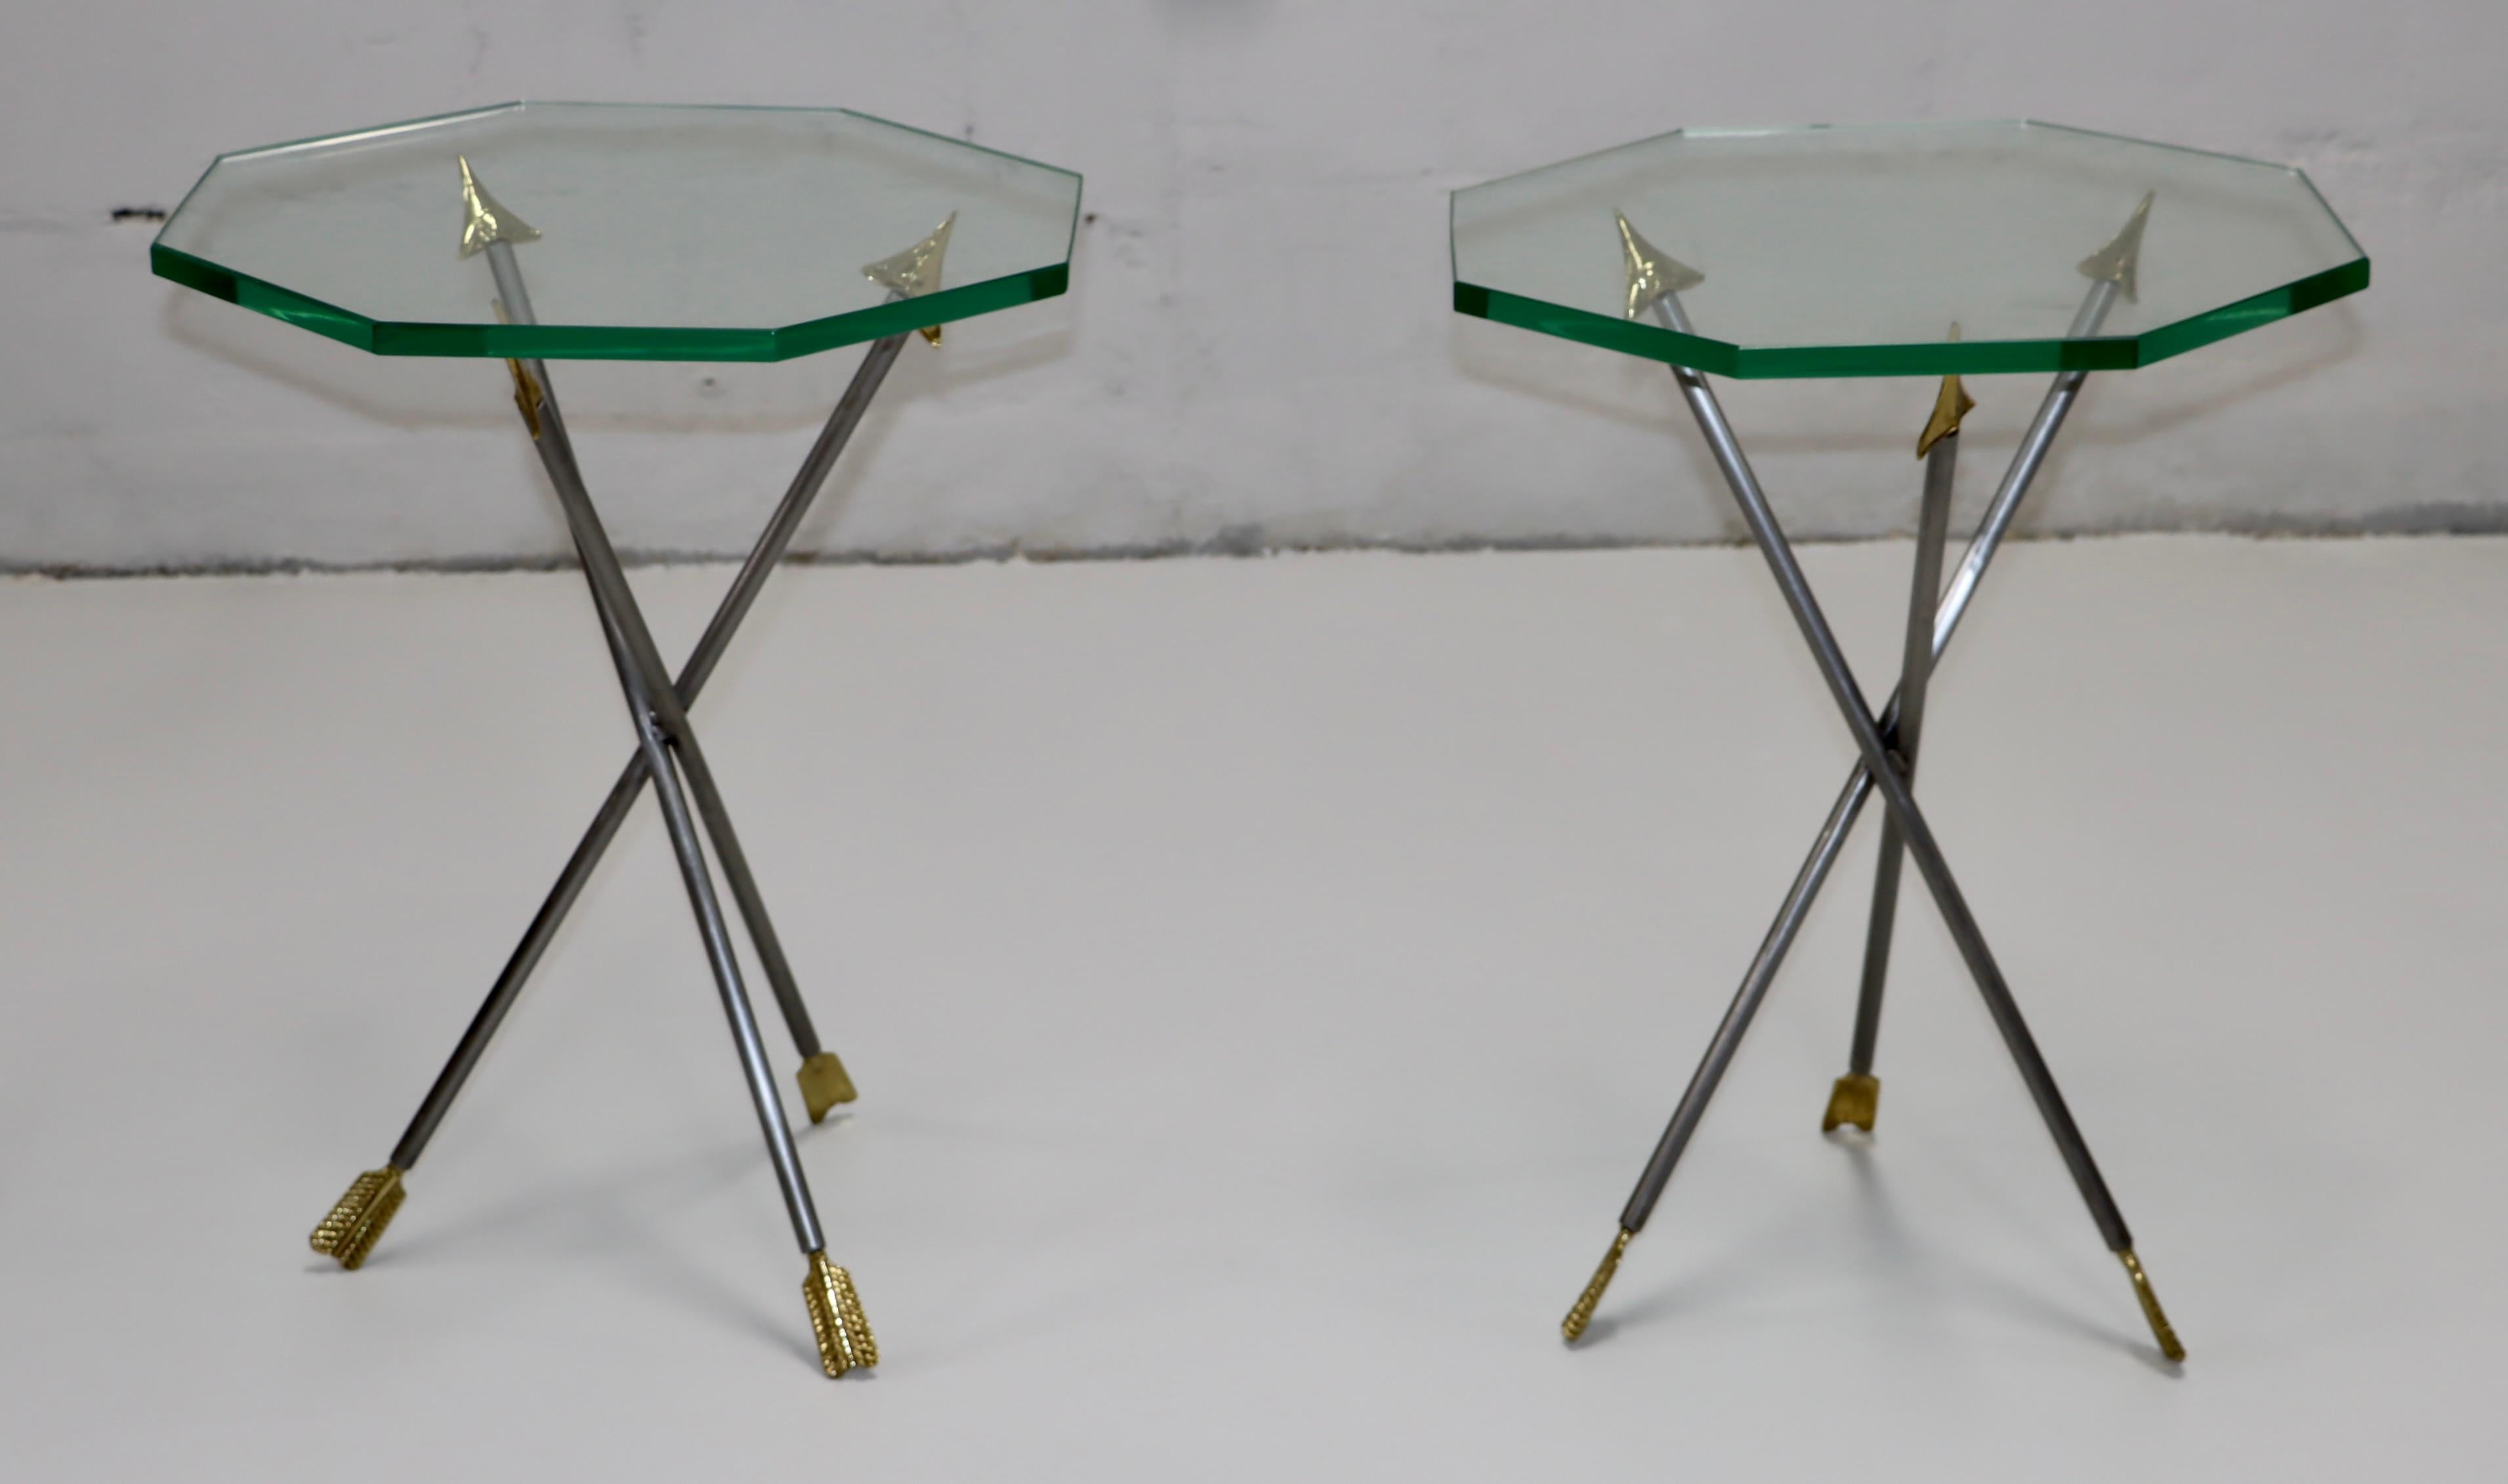 1970's Mid-Century Modern steel and brass arrow base side tables with octagonal 3/4'' glass tops, in vintage original condition with some wear and patina due to age and use.